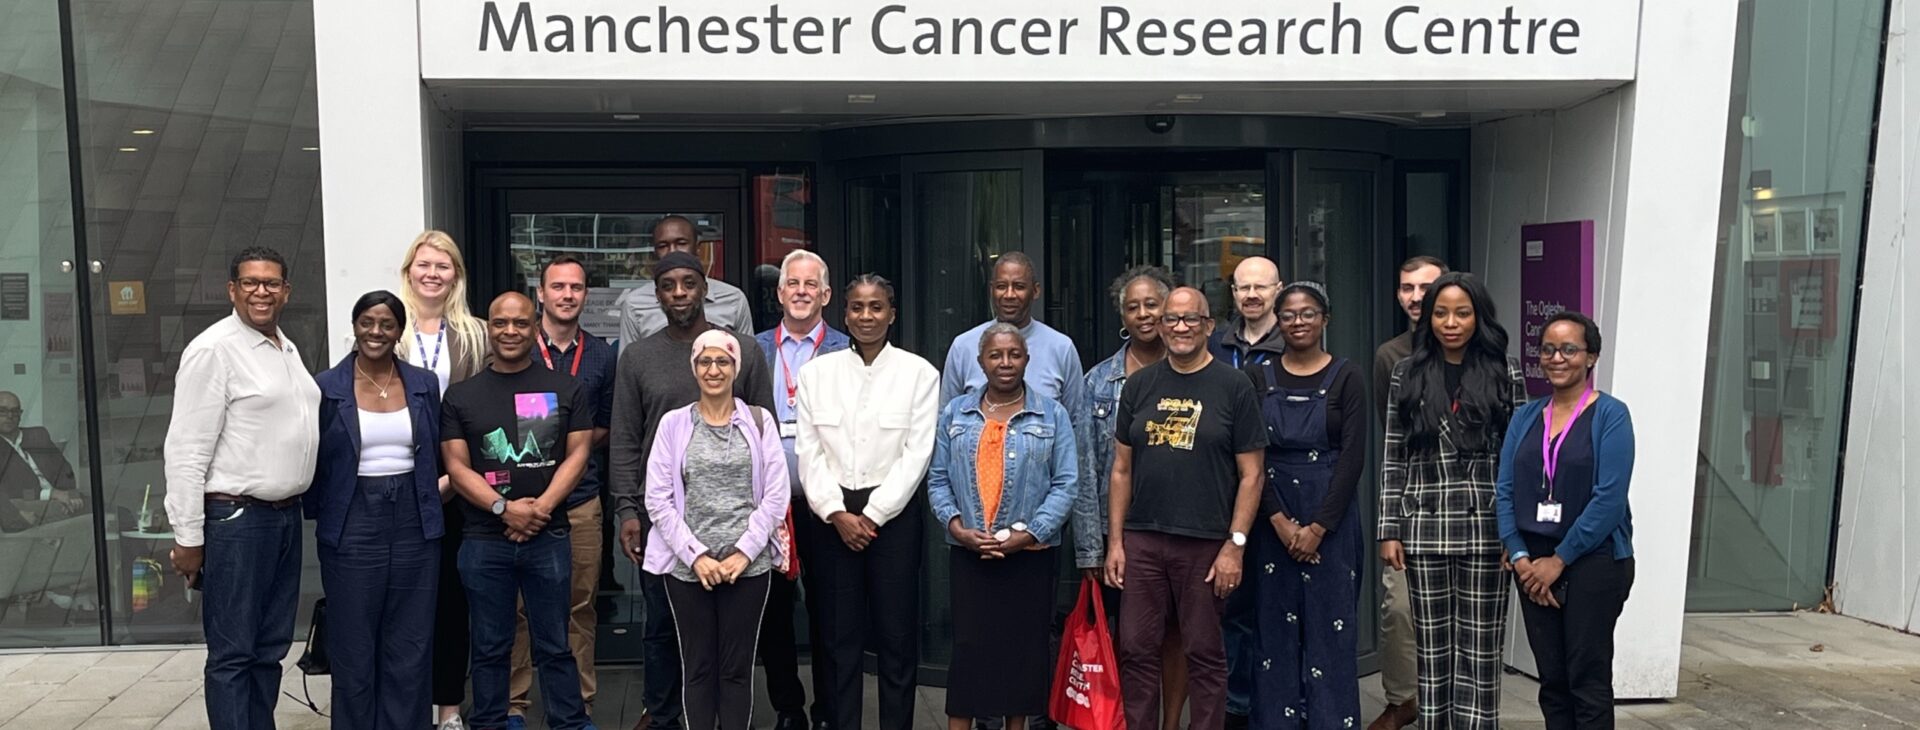 Delegates from Can Survive UK and the MCRC outside the Oglesby Cancer Research Building in Manchester